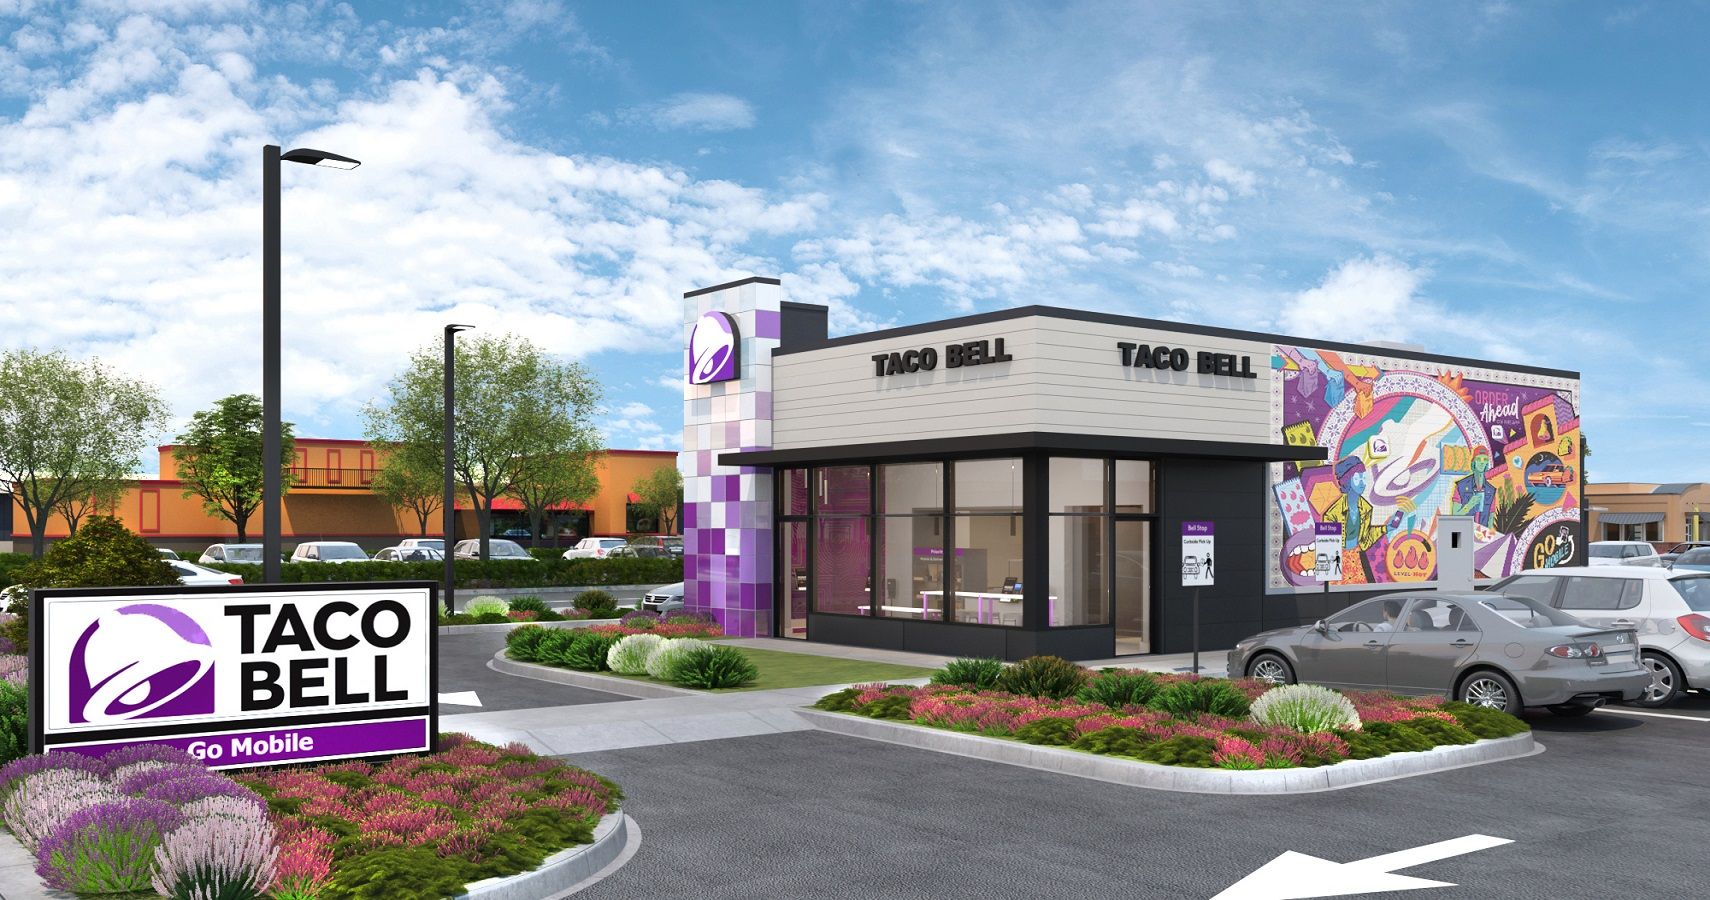 Taco Bell of the Future